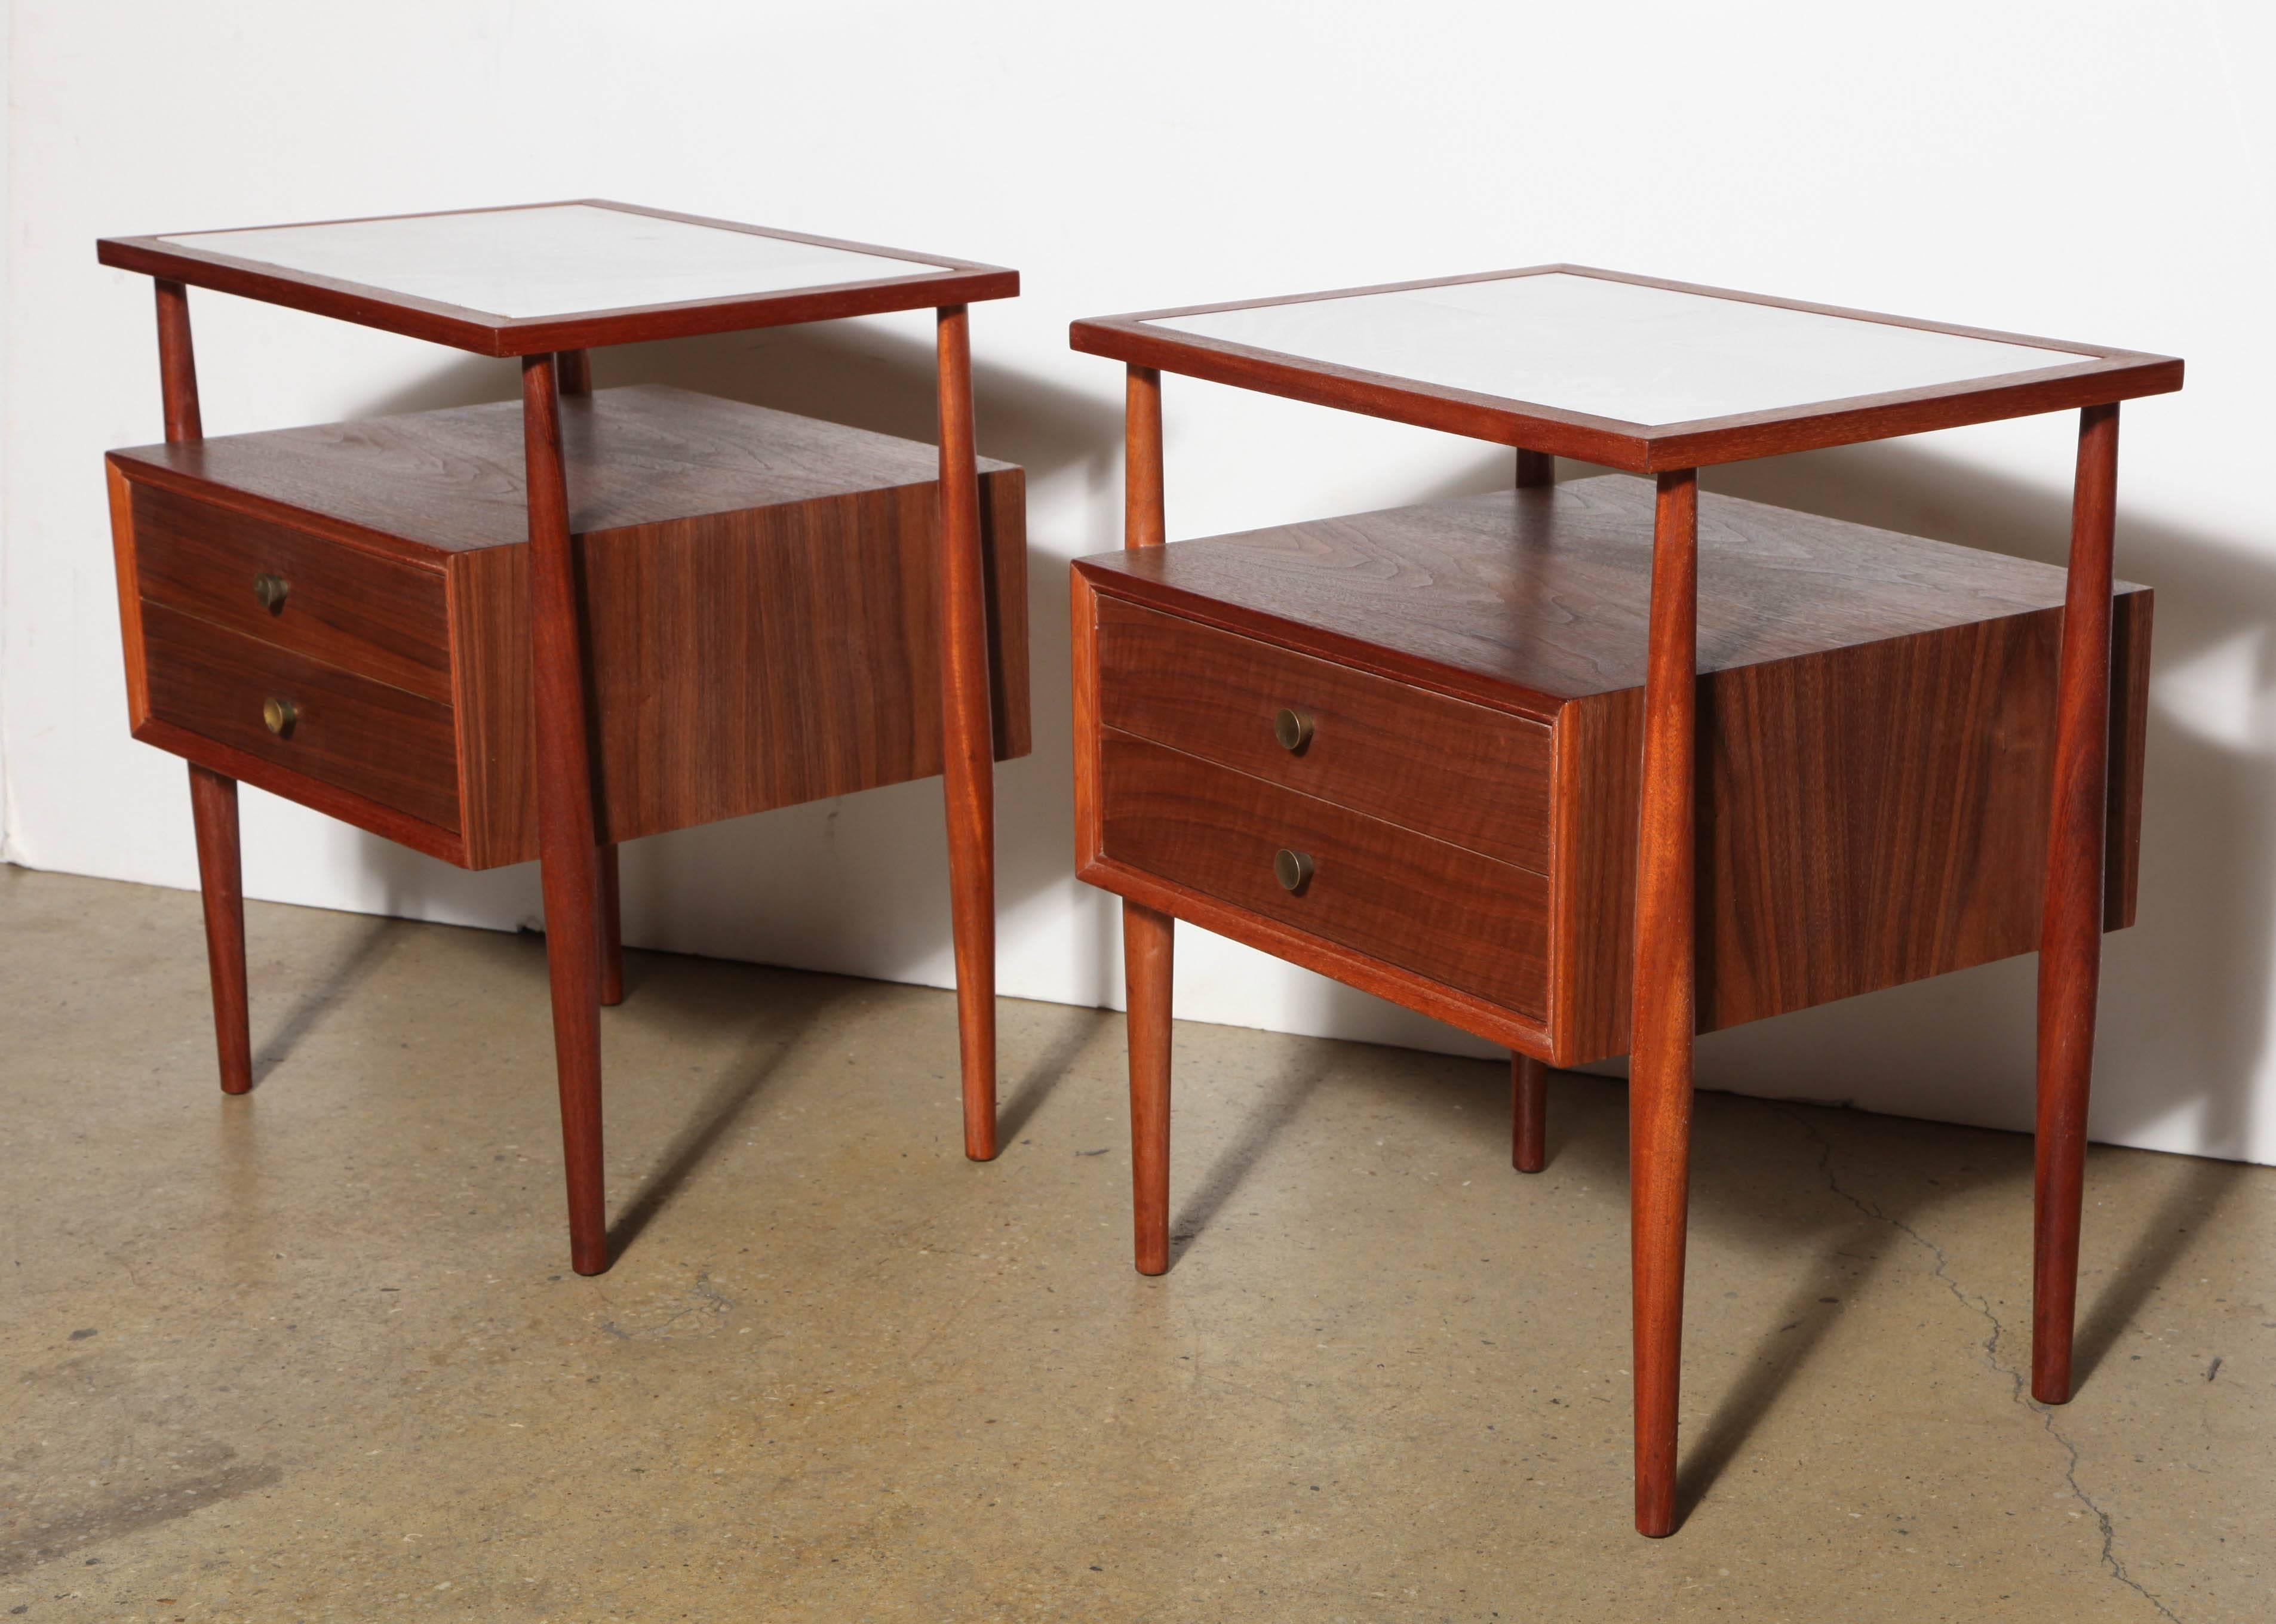 pair of Landstrom Furniture of Rockford, Illinois Bedside Tables.  Featuring rectangular form in Mahogany, Walnut and White Glass with two drawers.  
Each Table hung from 4 Mahogany dowel legs with matched Walnut drawers, containing addtional